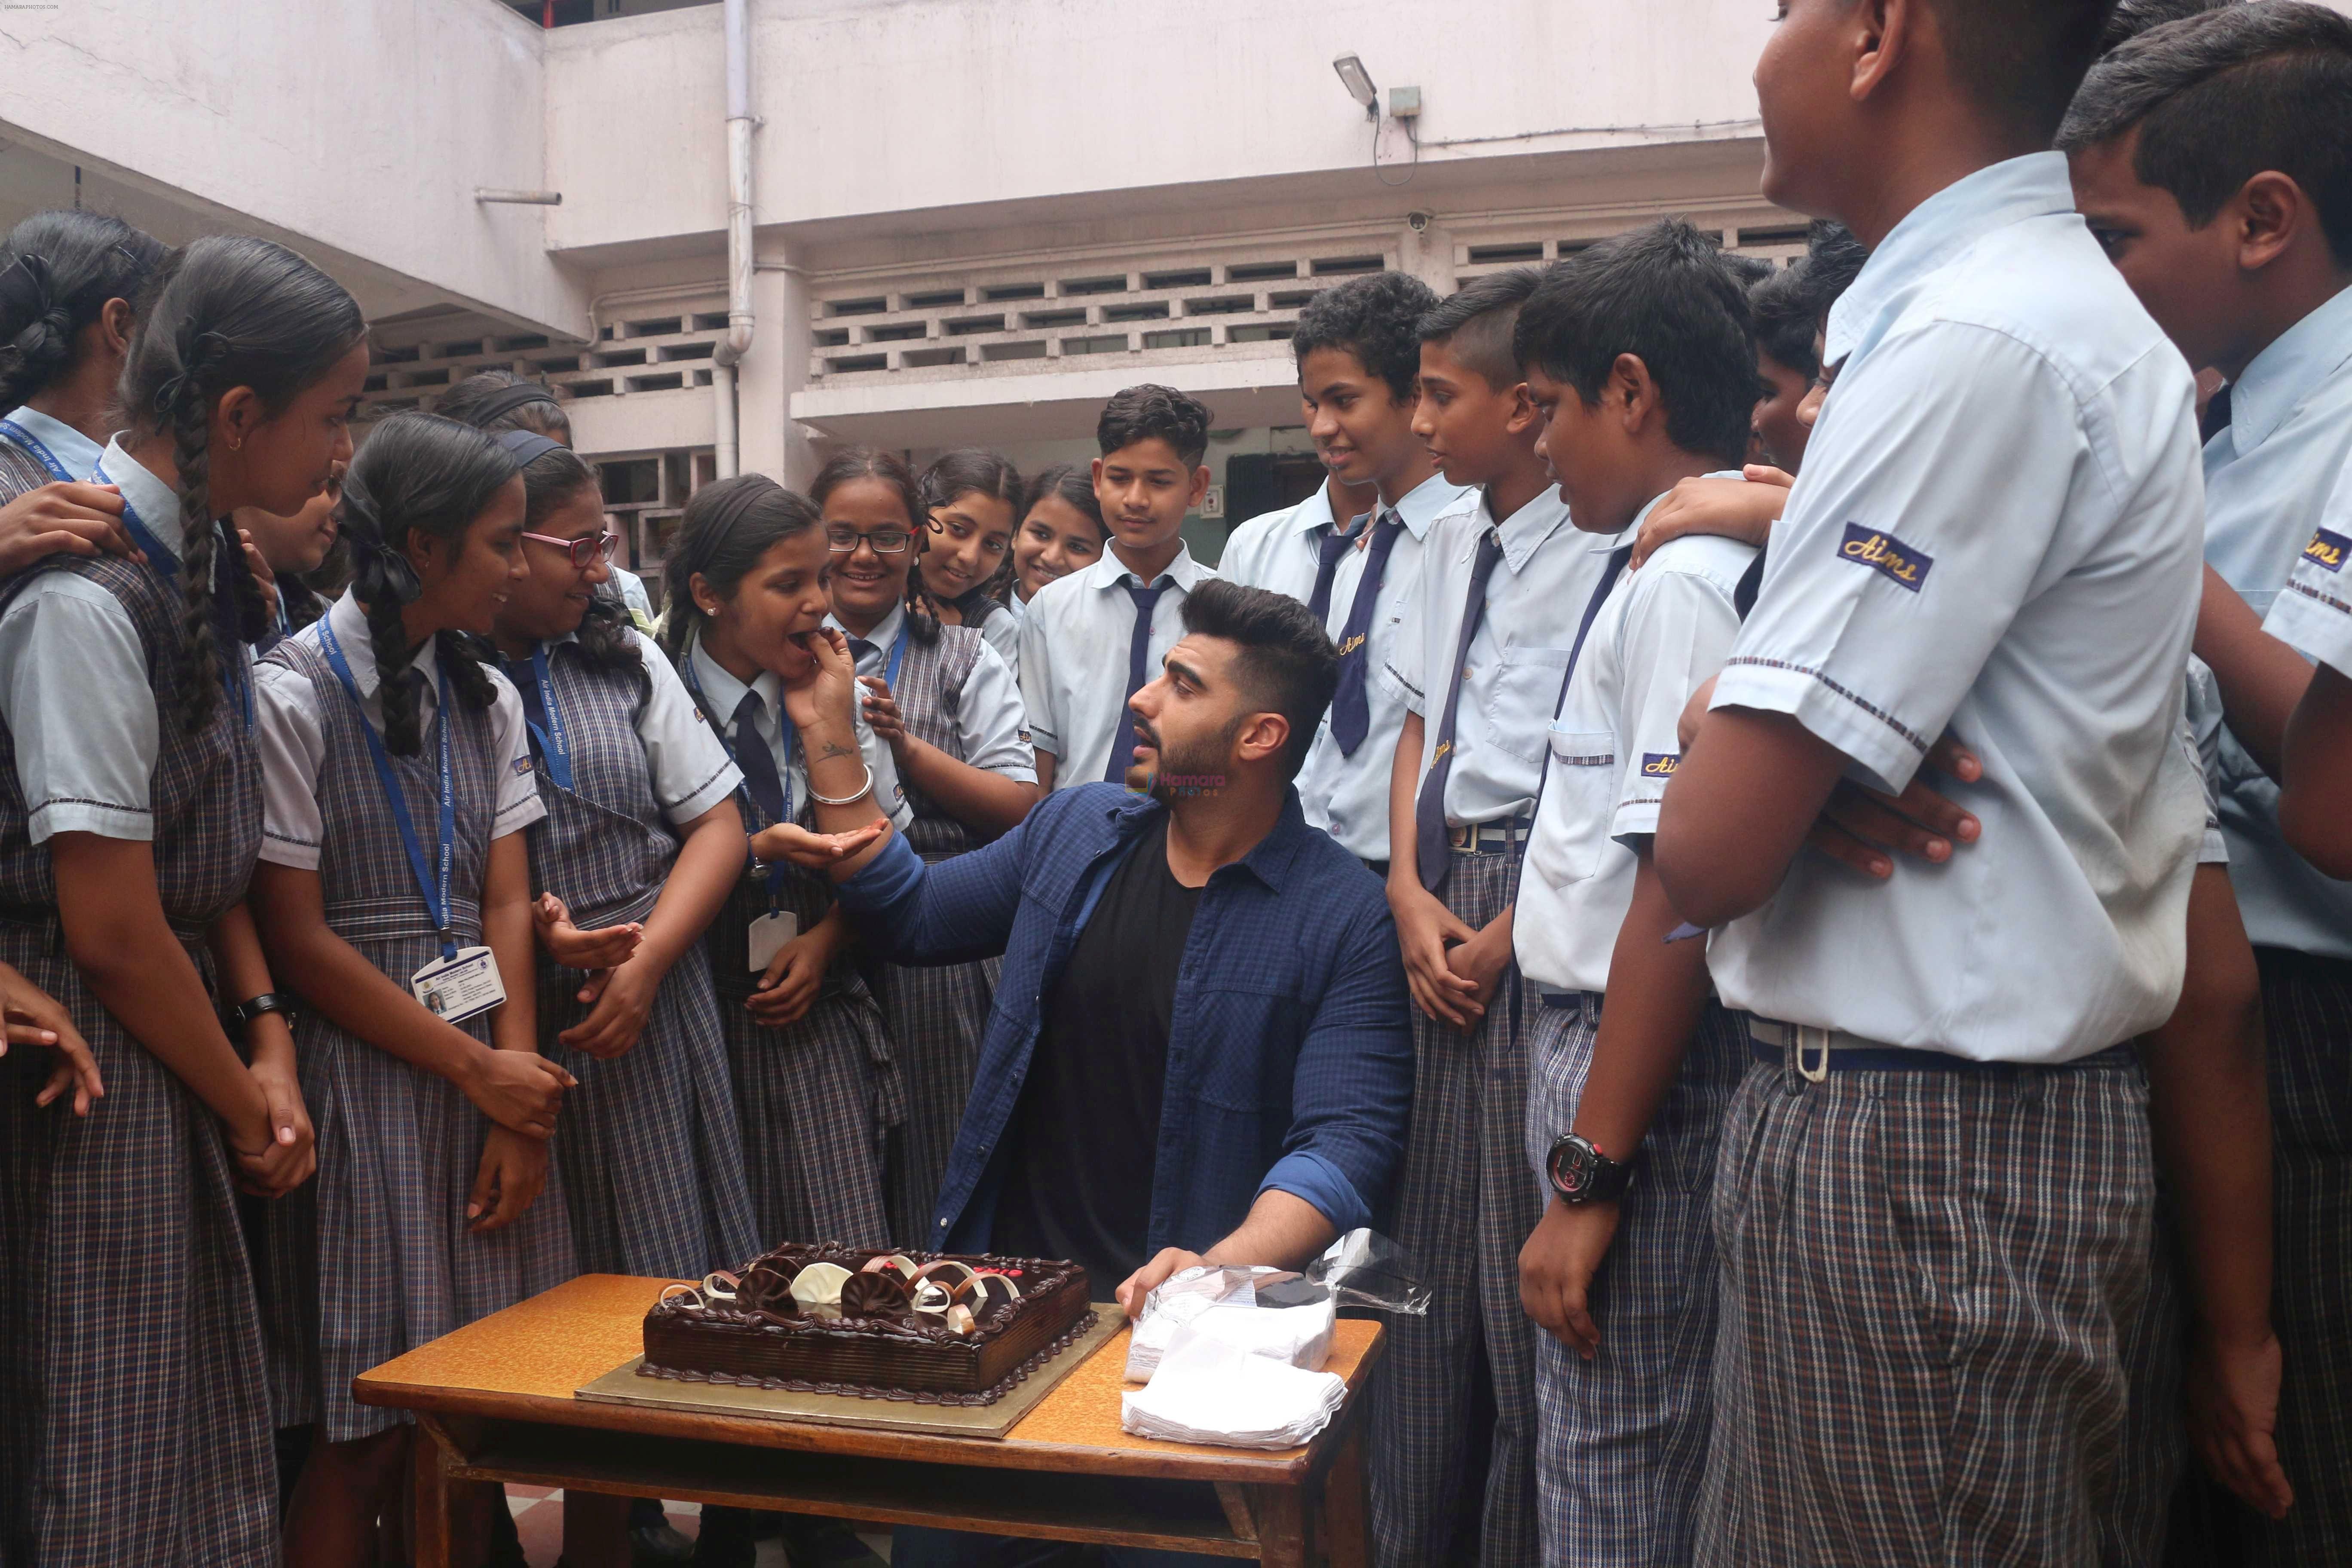 Arjun Kapoor, ambassador for Gender Equality of Girl Rising India Foundation shooting a campaign with 40 kids at Air India Modern School Kalina on 17th April 2018